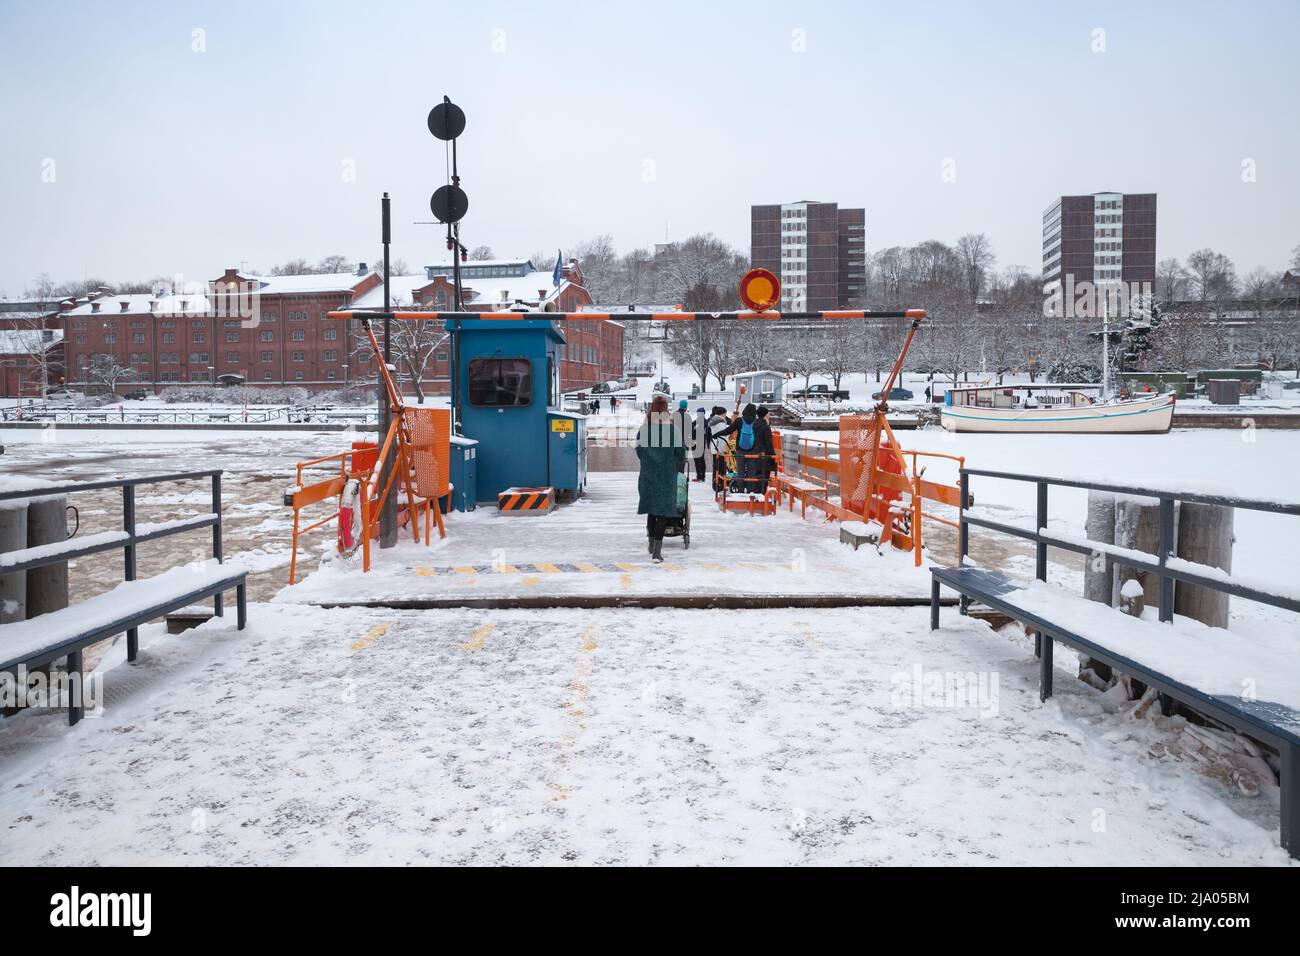 Turku, Finland - January 17, 2016: Ordinary passengers loading on small city boat Fori, a light traffic ferry that has served the Aura River for over Stock Photo